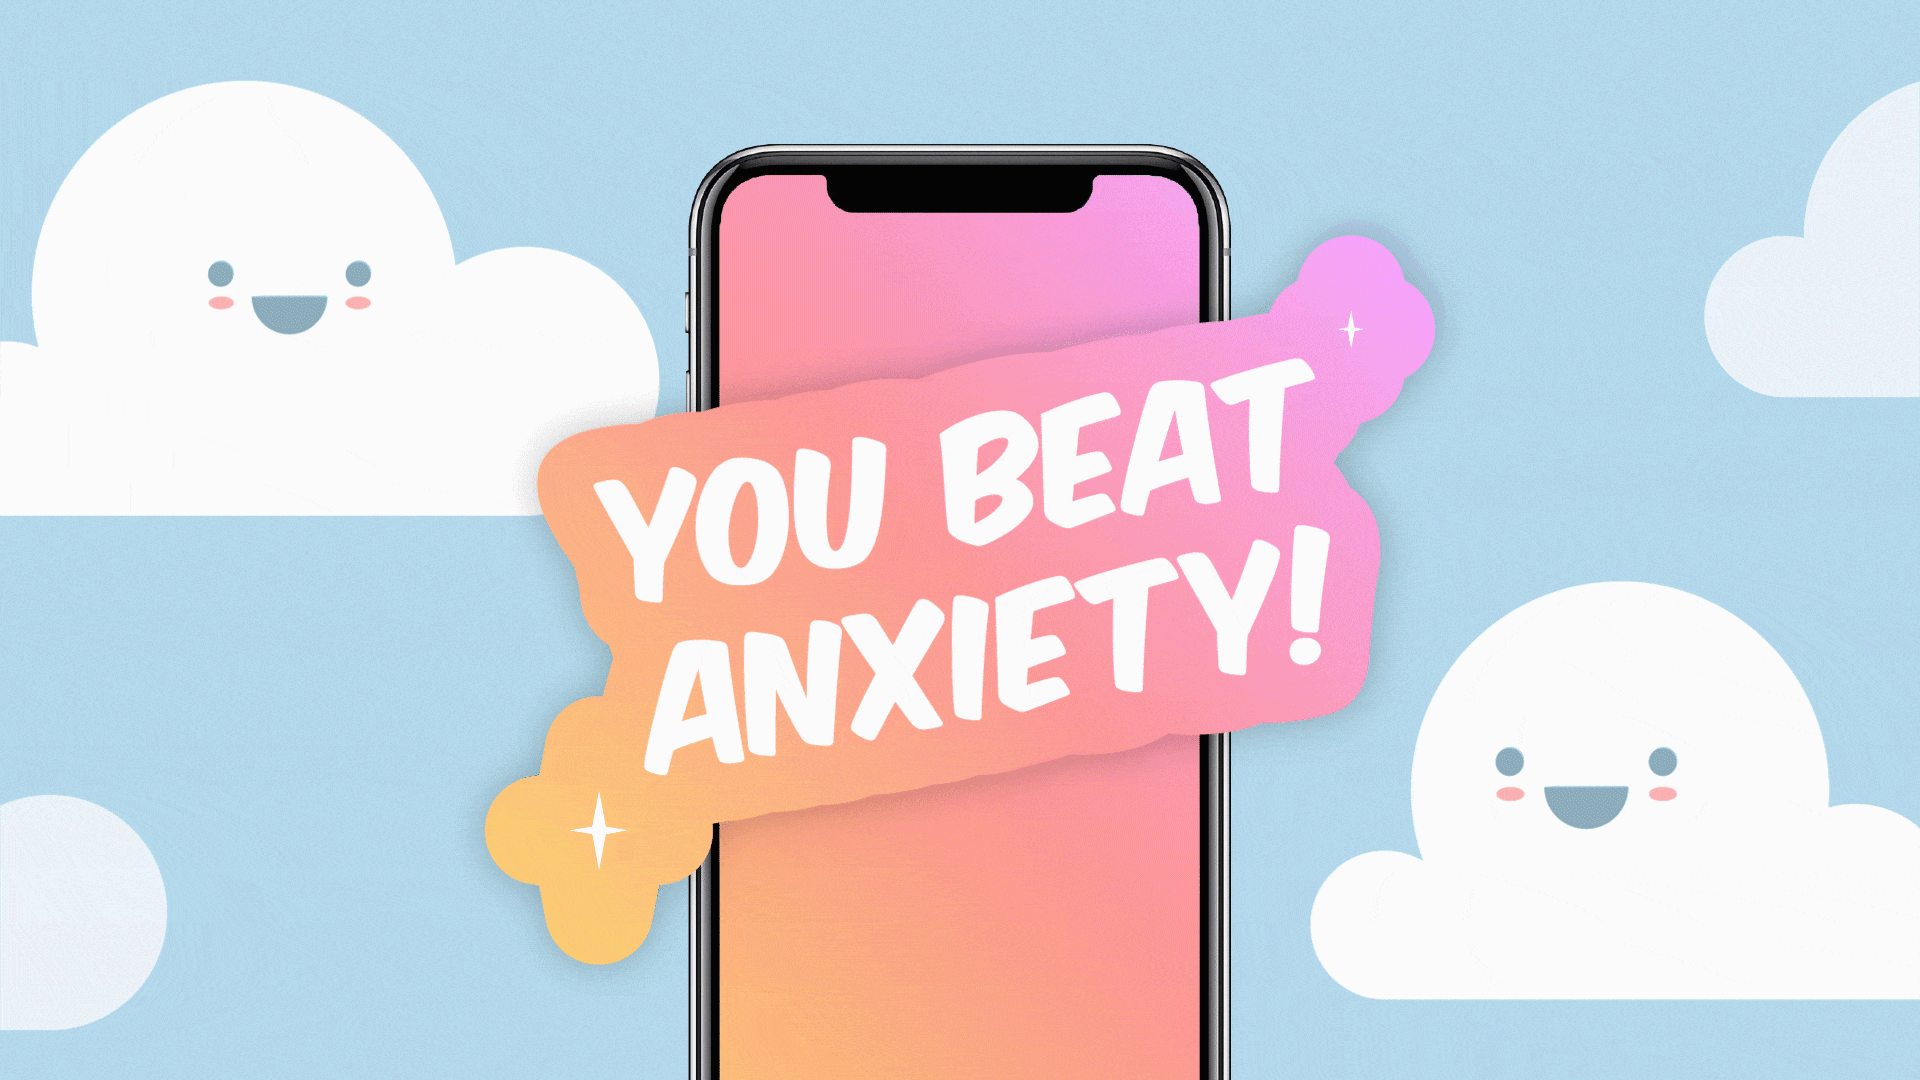 A illustration of a phone in the sky that says “You beat anxiety!” surrounded by cheerful-looking clouds.